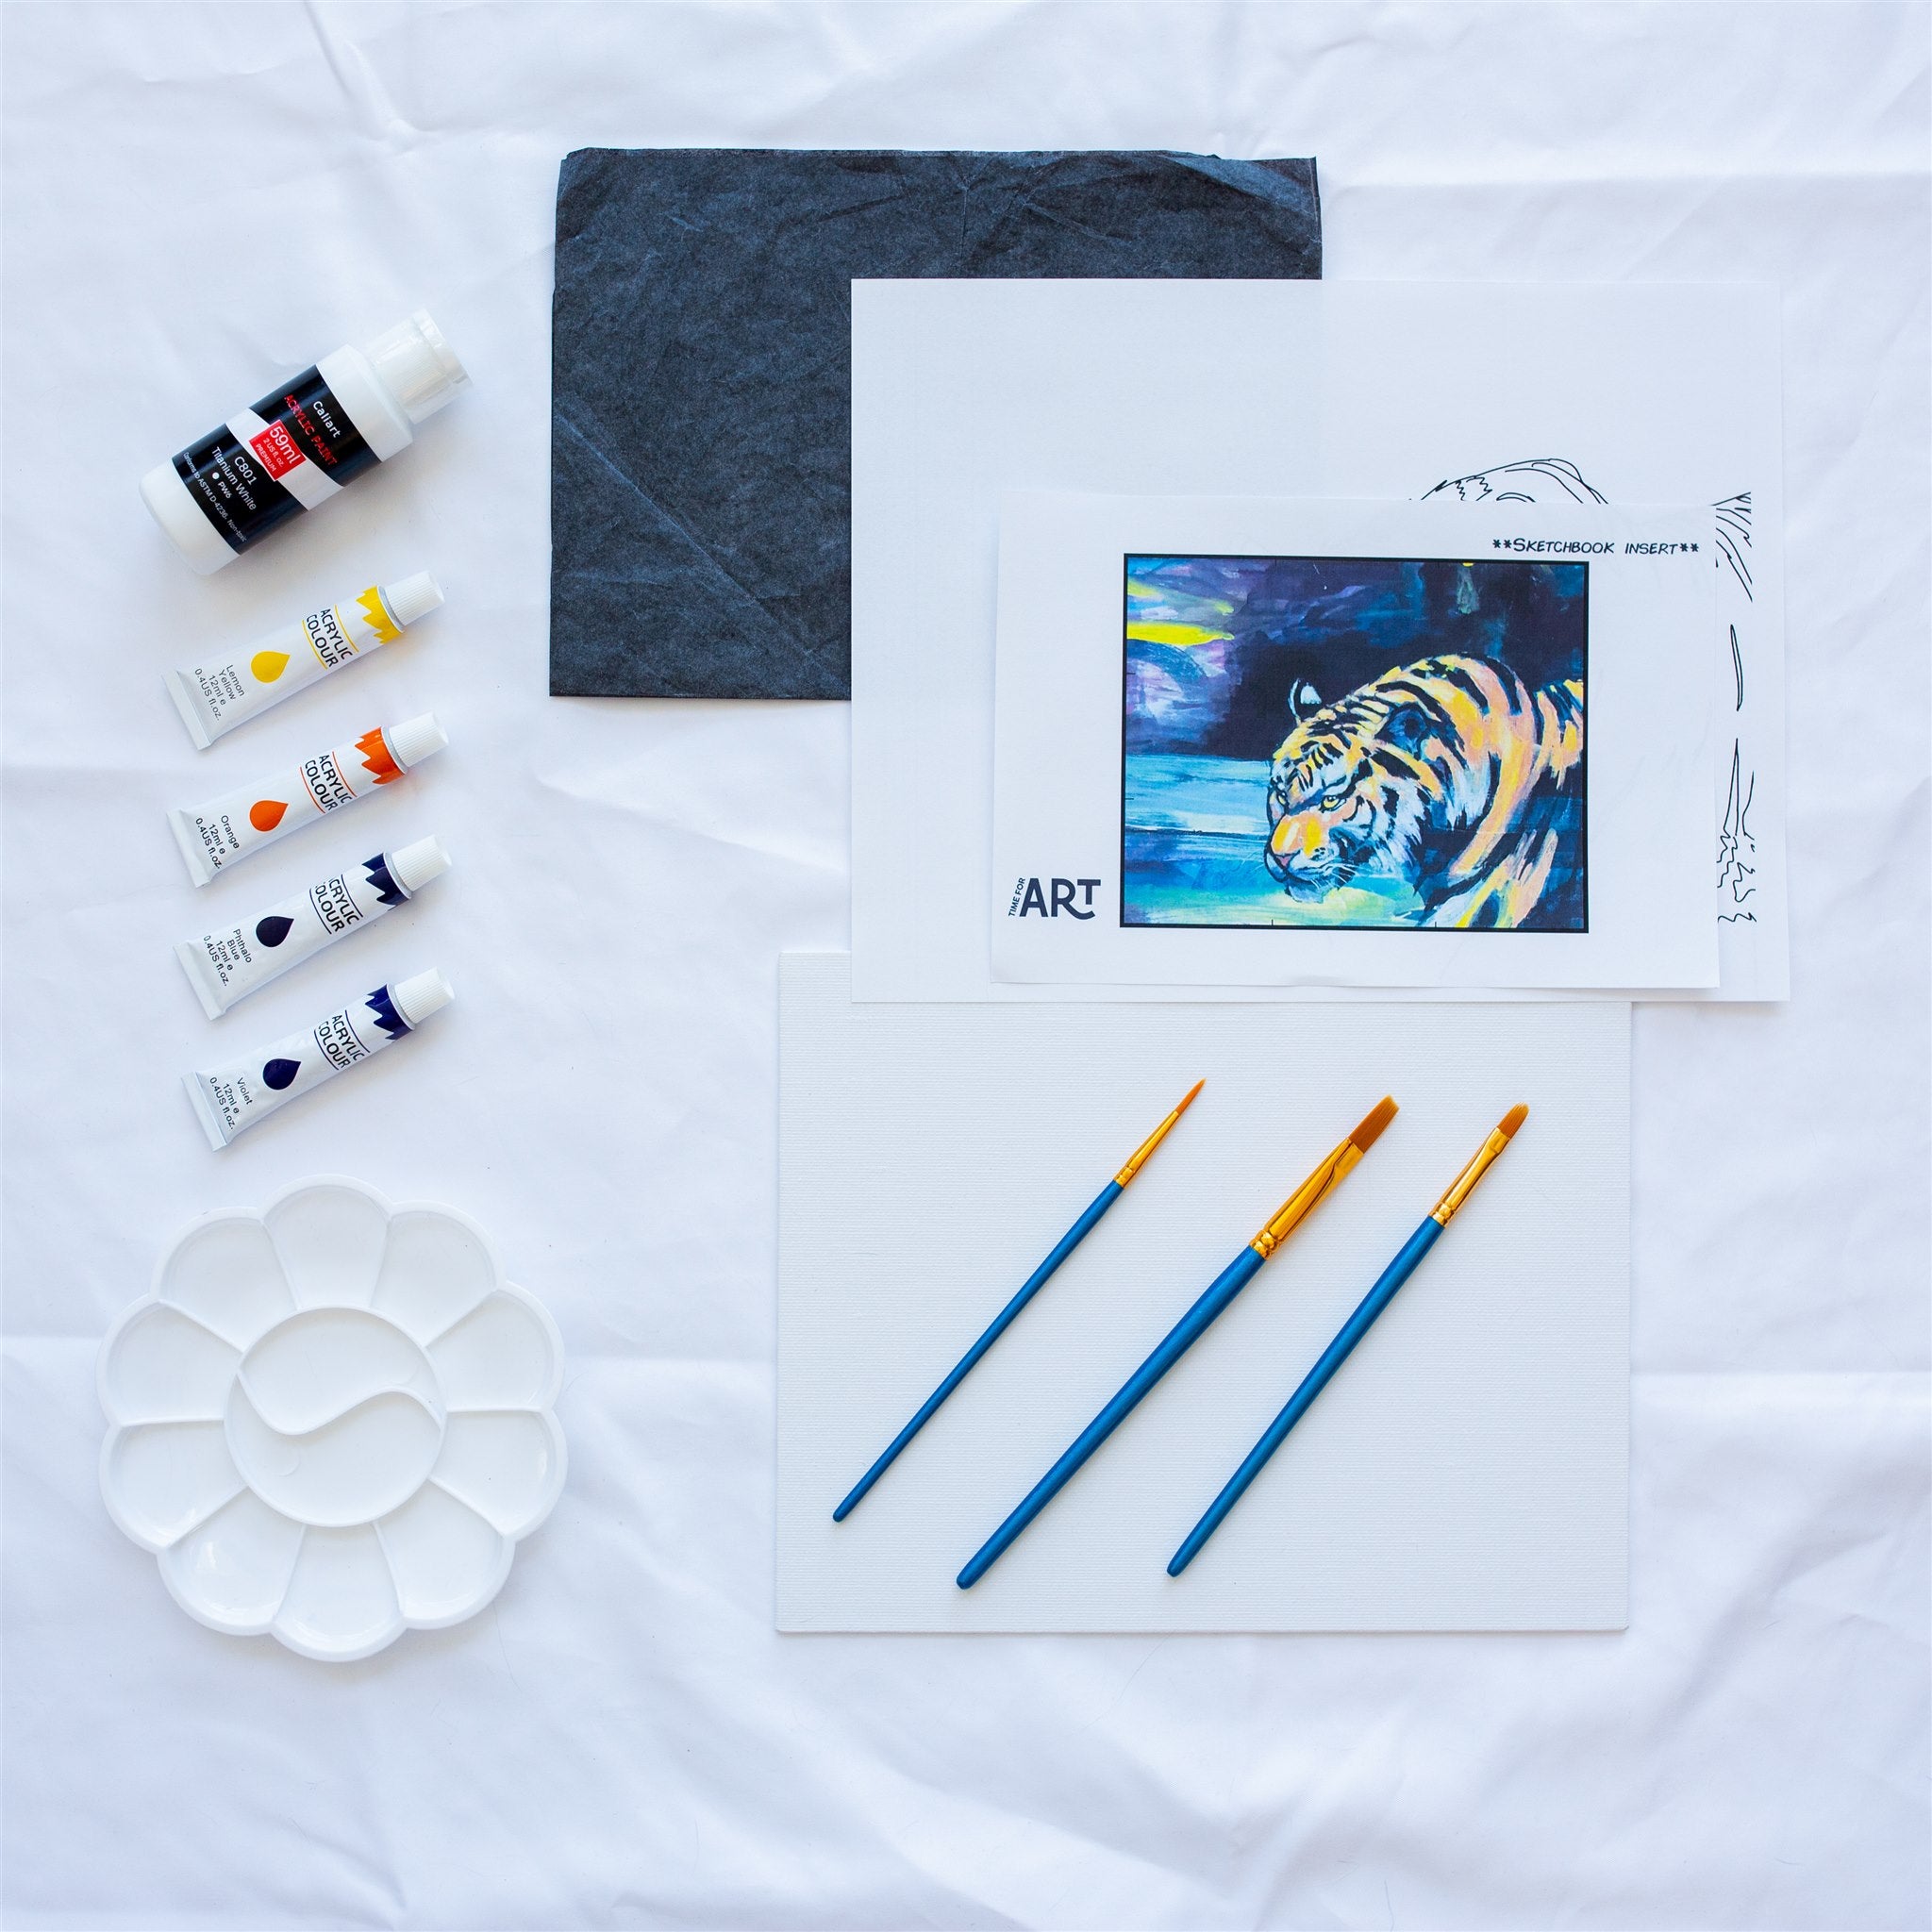 Whats included in the Tiger King Abstract painting kit. 4 acrylic paints, painters pallet, brushes, canvas panel, traceable outline, and reference image.